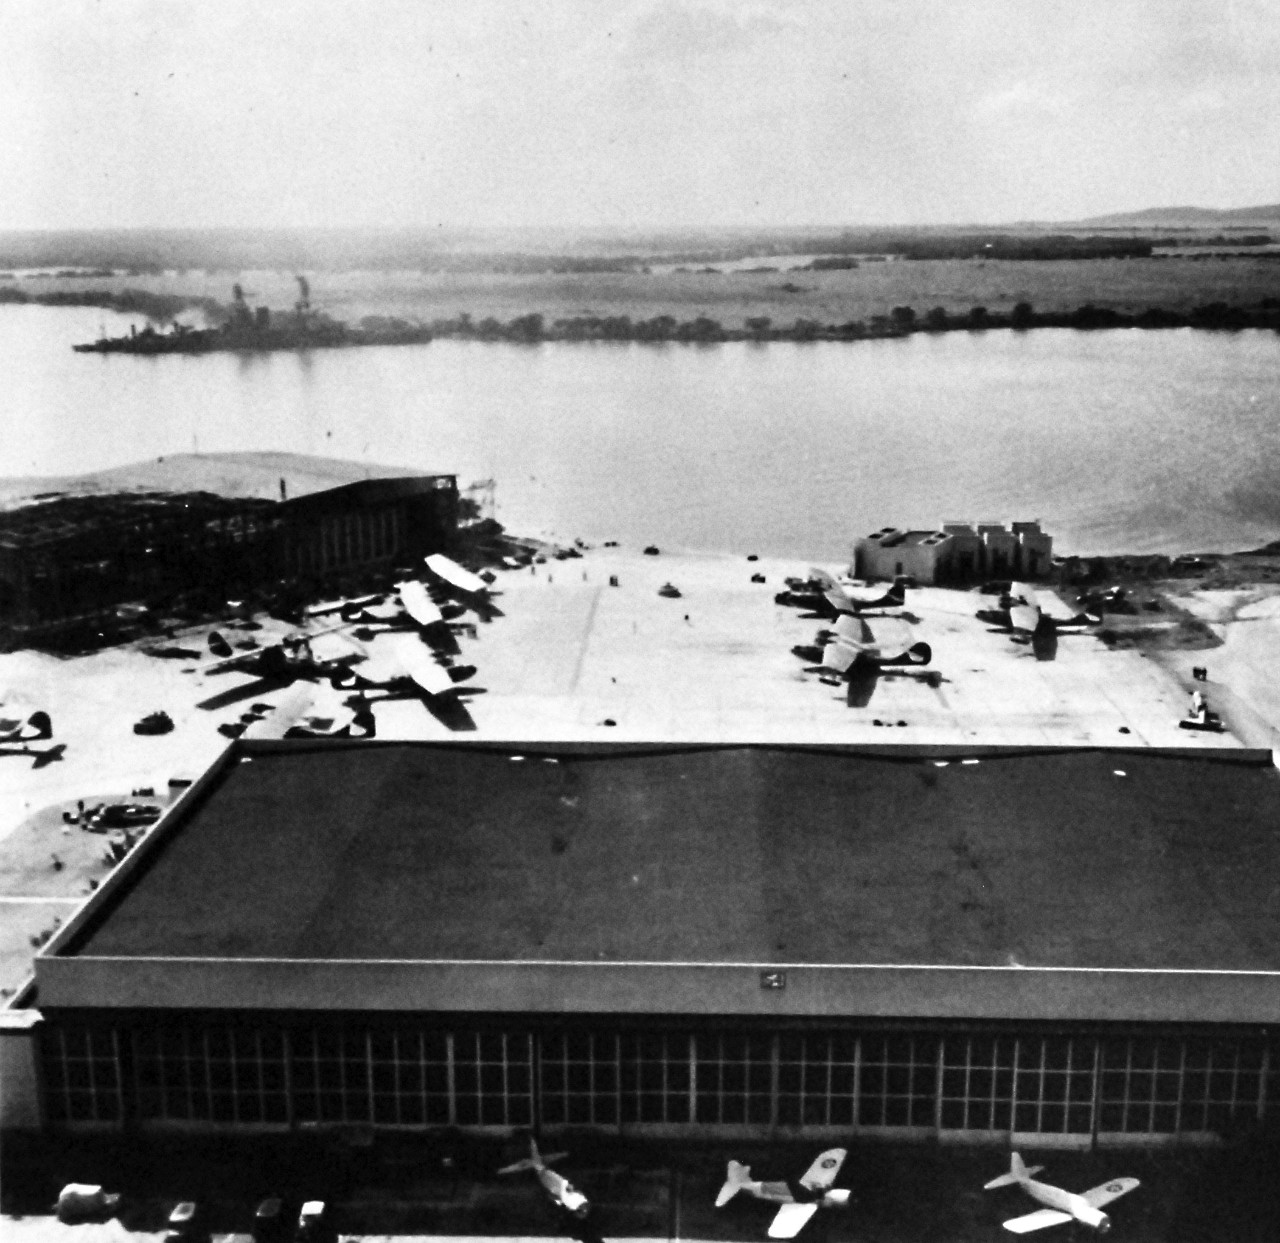 80-G-32926:  Japanese Attack on Pearl Harbor Attack, 7 December 1941.   Damaged planes and hangar at Pearl Harbor, Territory of Hawaii, after Japanese attack on 7 December 1941. U.S. Navy photograph, now in the collections of the National Archives.    (9/13/2013).